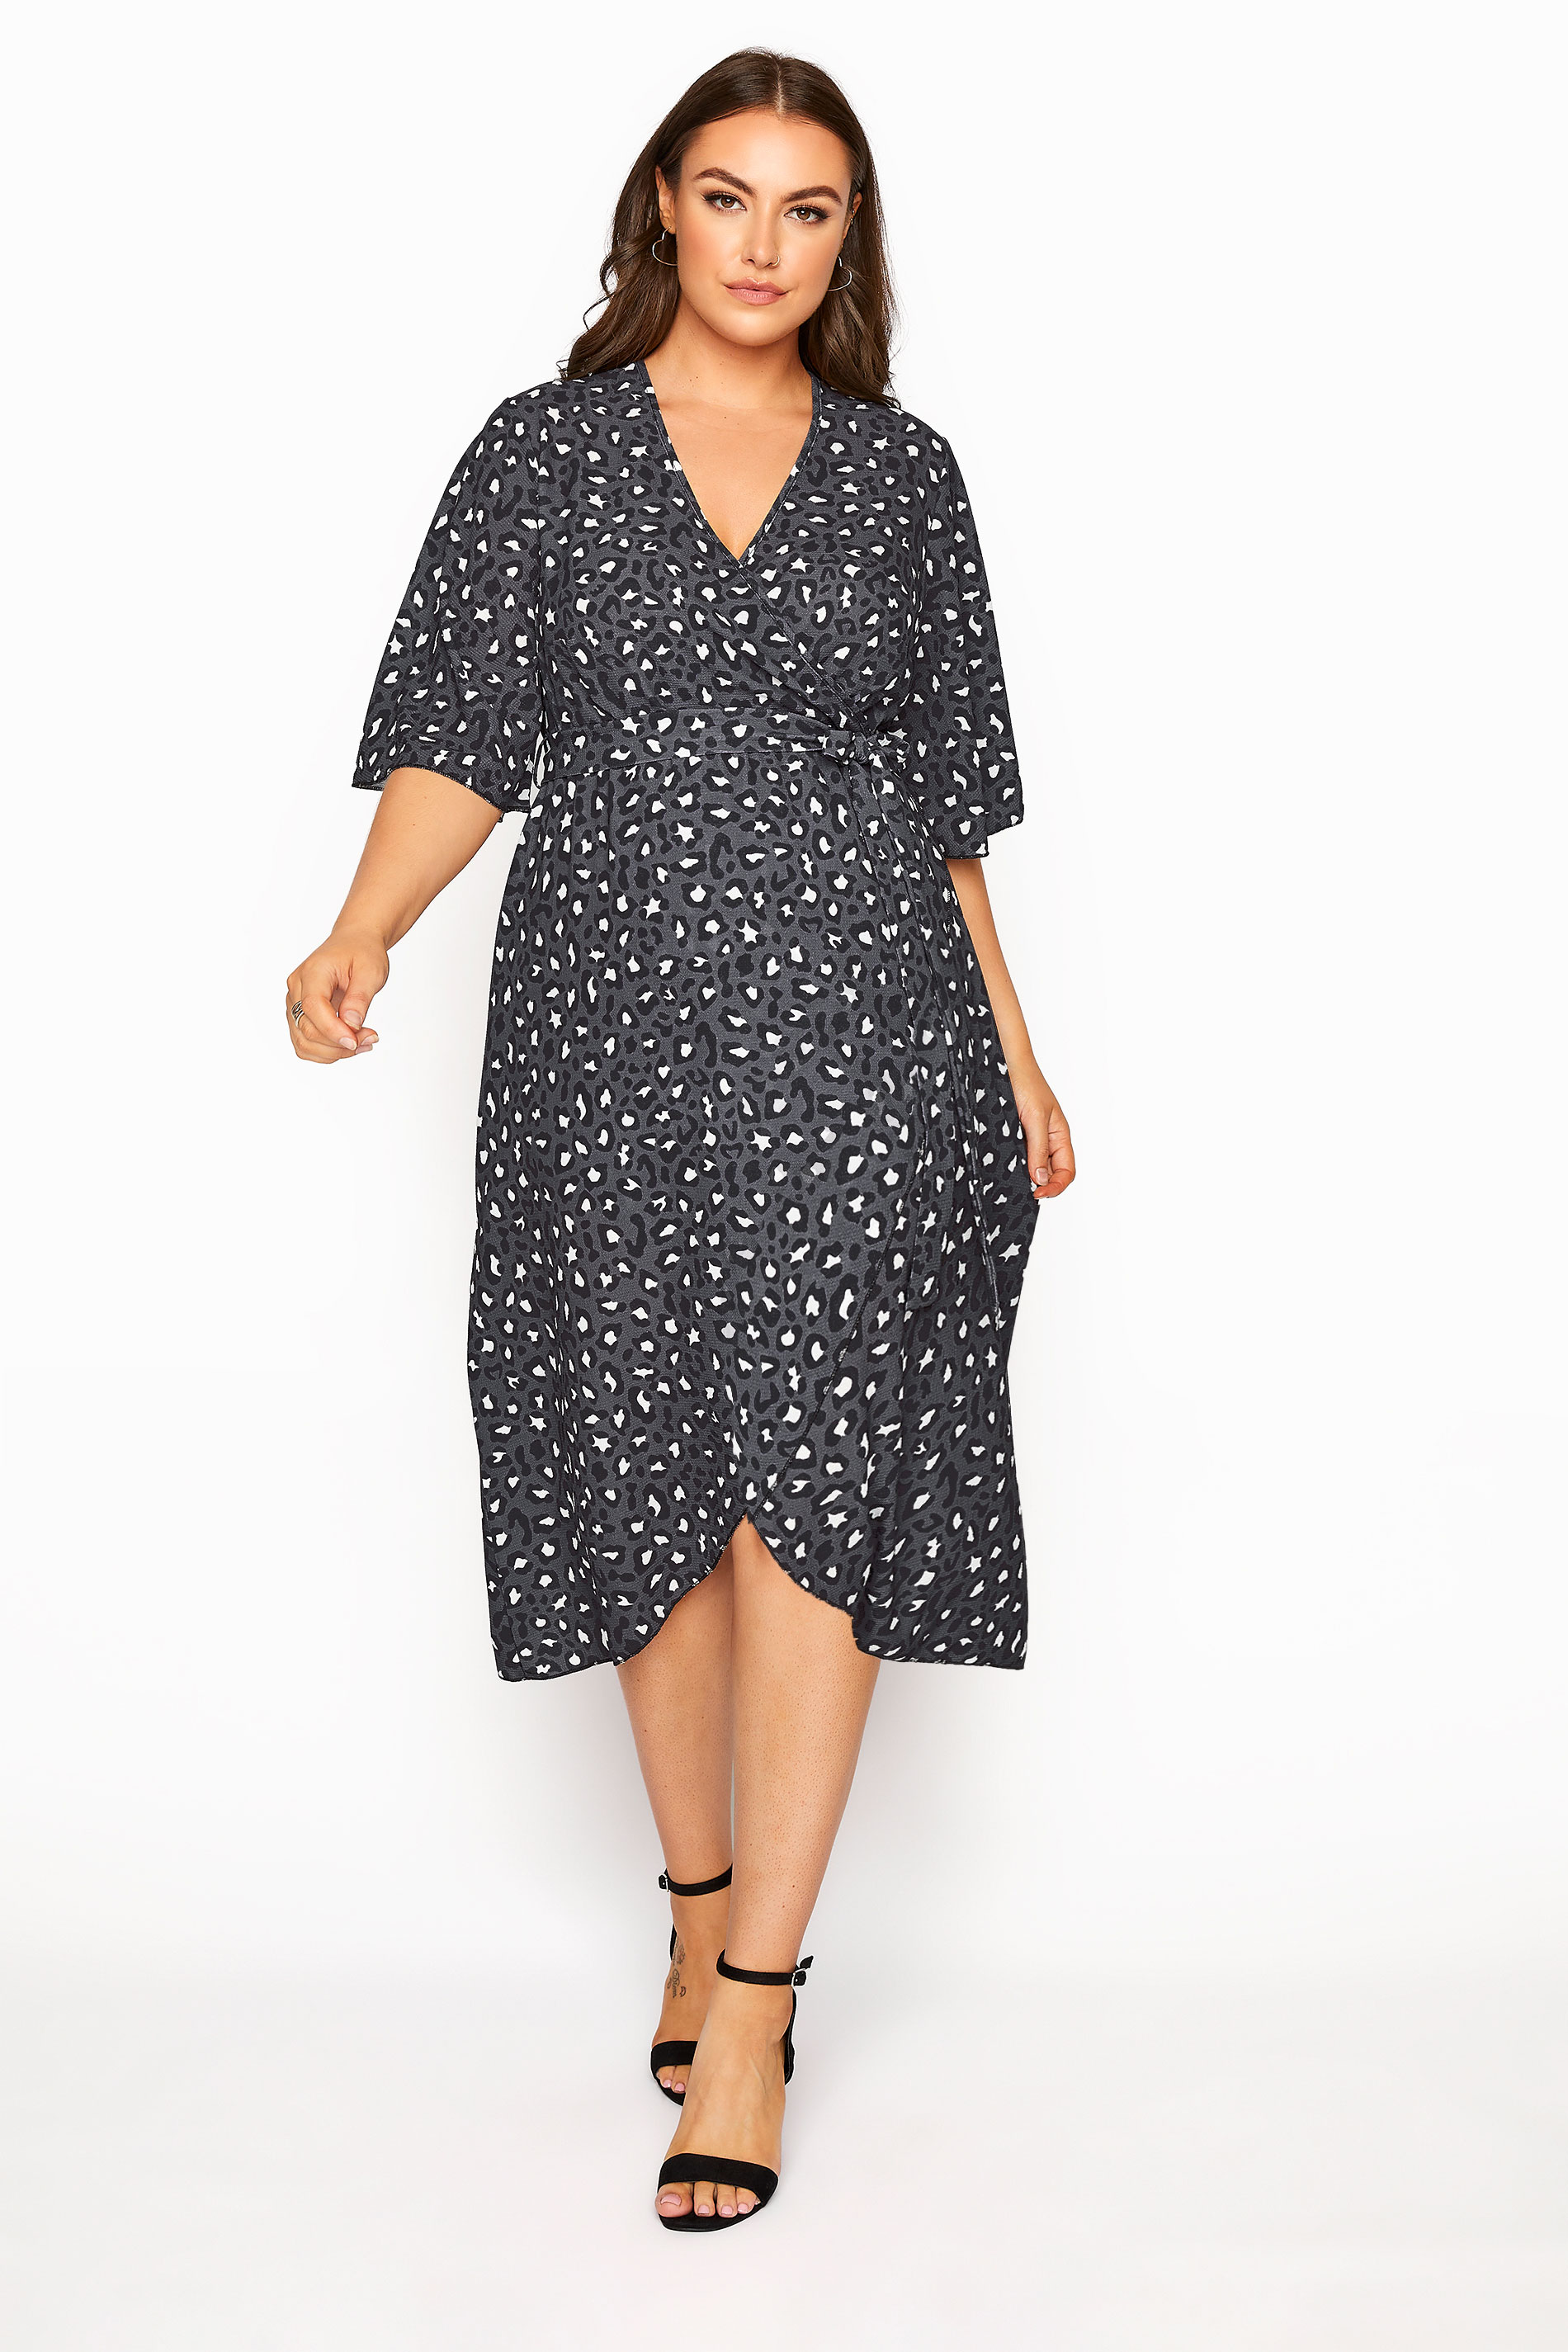 Robes Grande Taille Grande taille  Robes Portefeuilles | YOURS LONDON - Robe Grise Cache-Coeur Léopard - MD07840